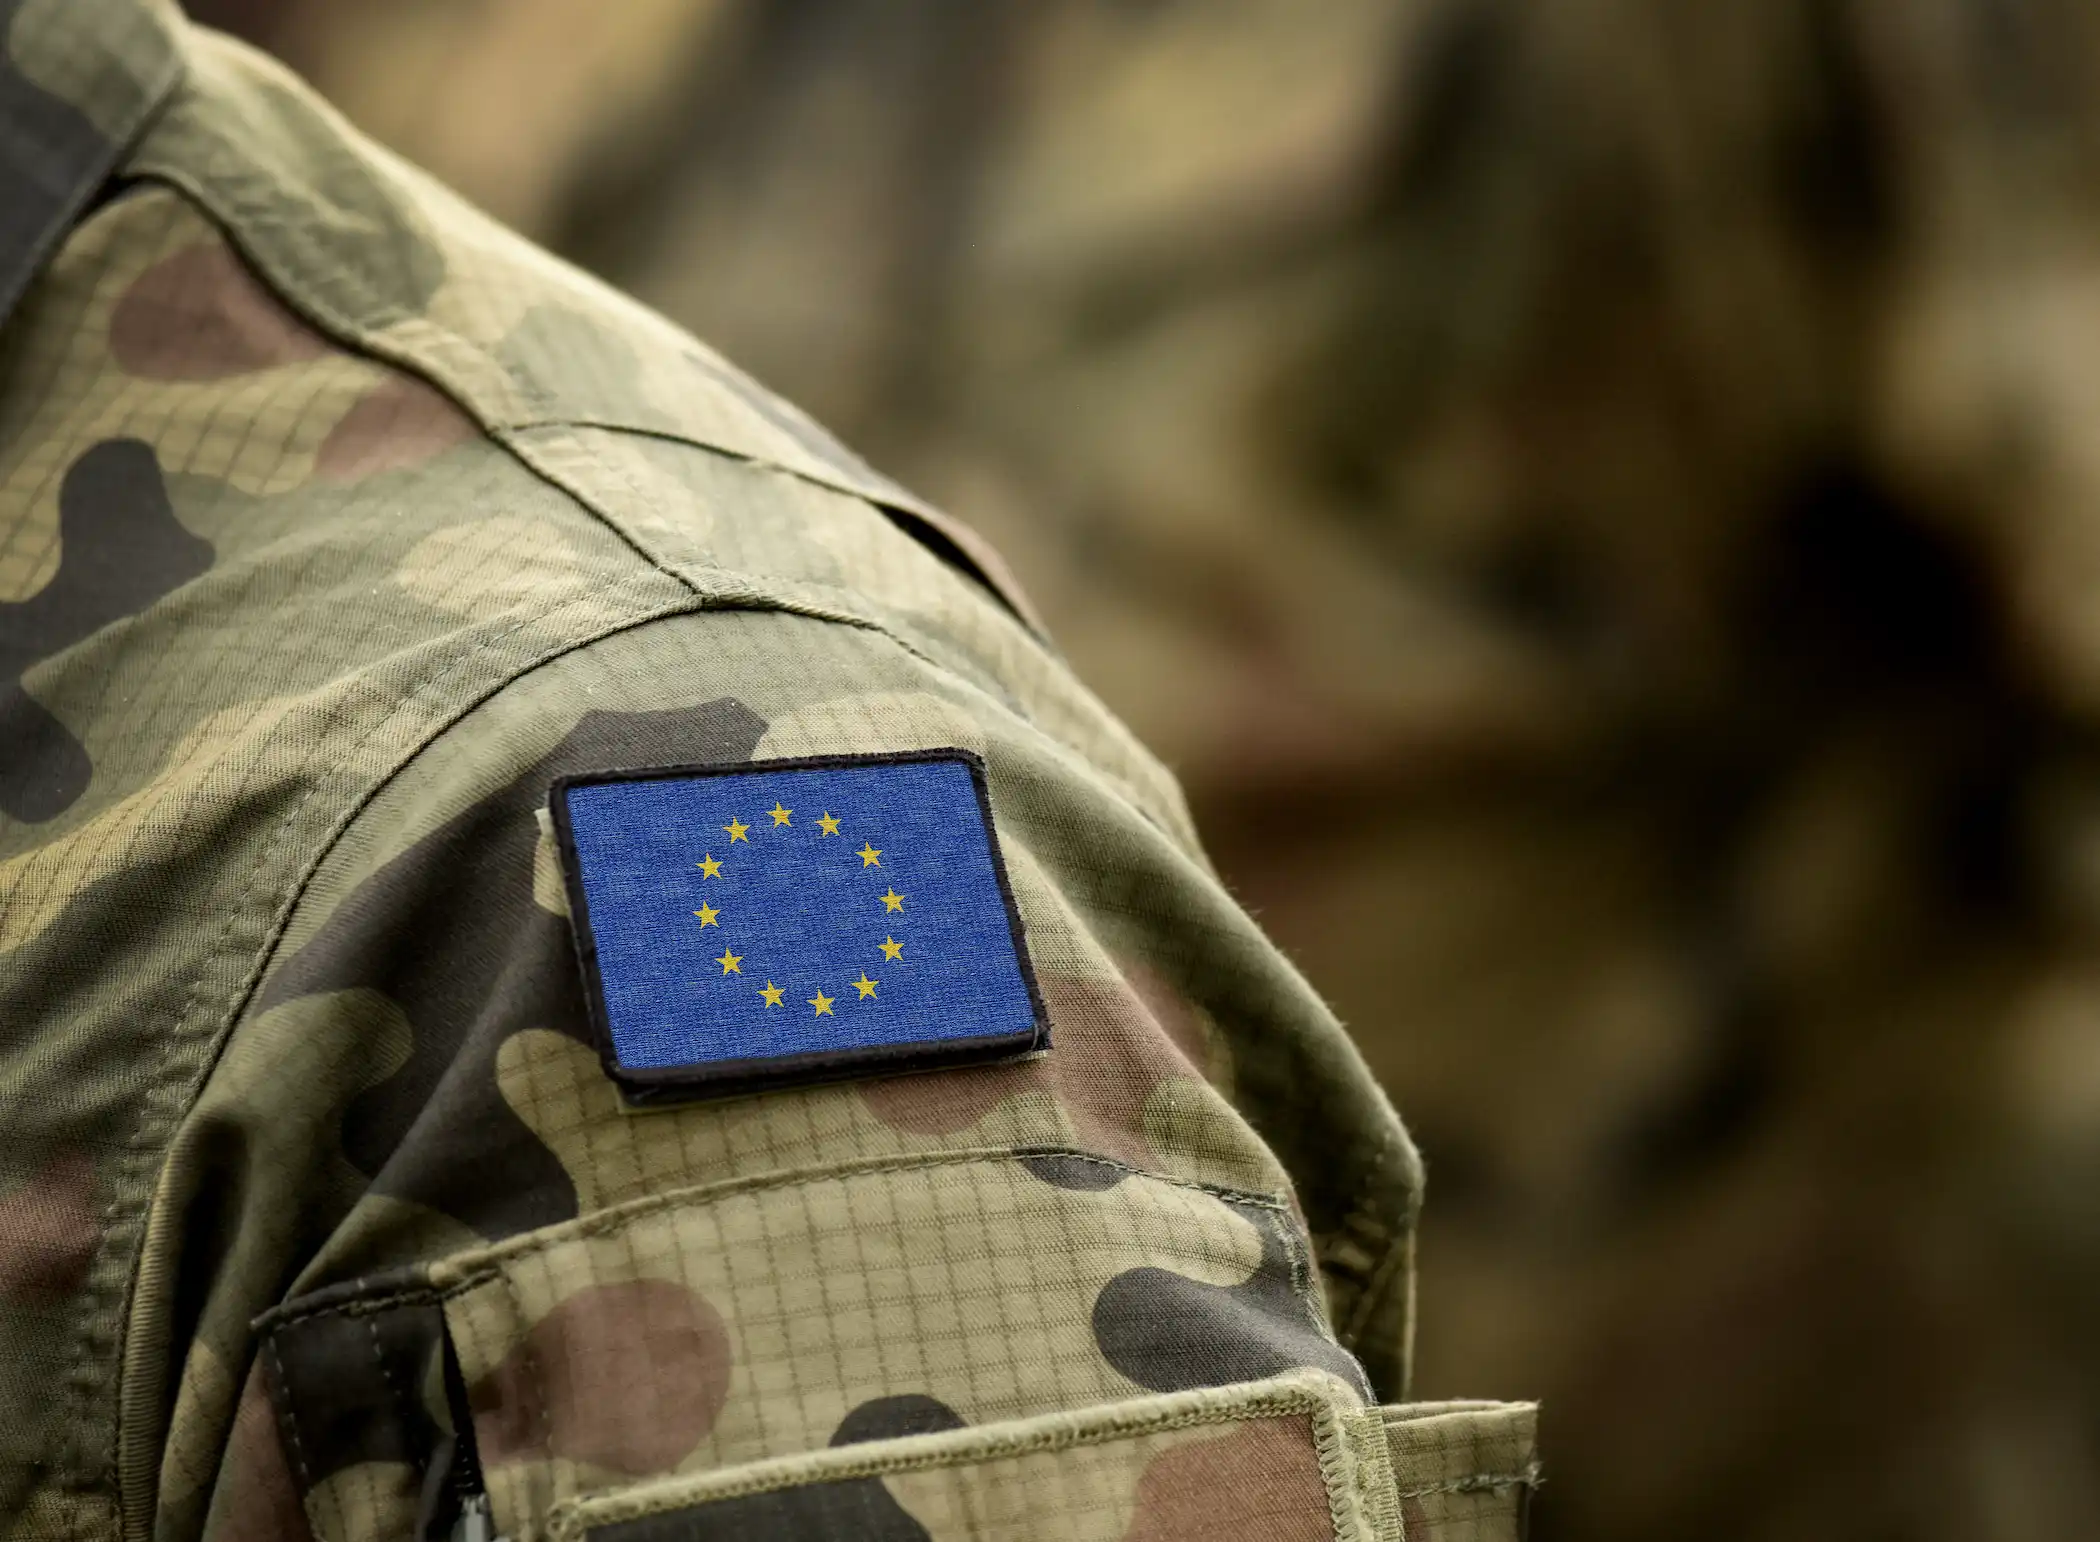 Rescheduling: Prioritising Arms over Development on the European Parliament’s Agenda